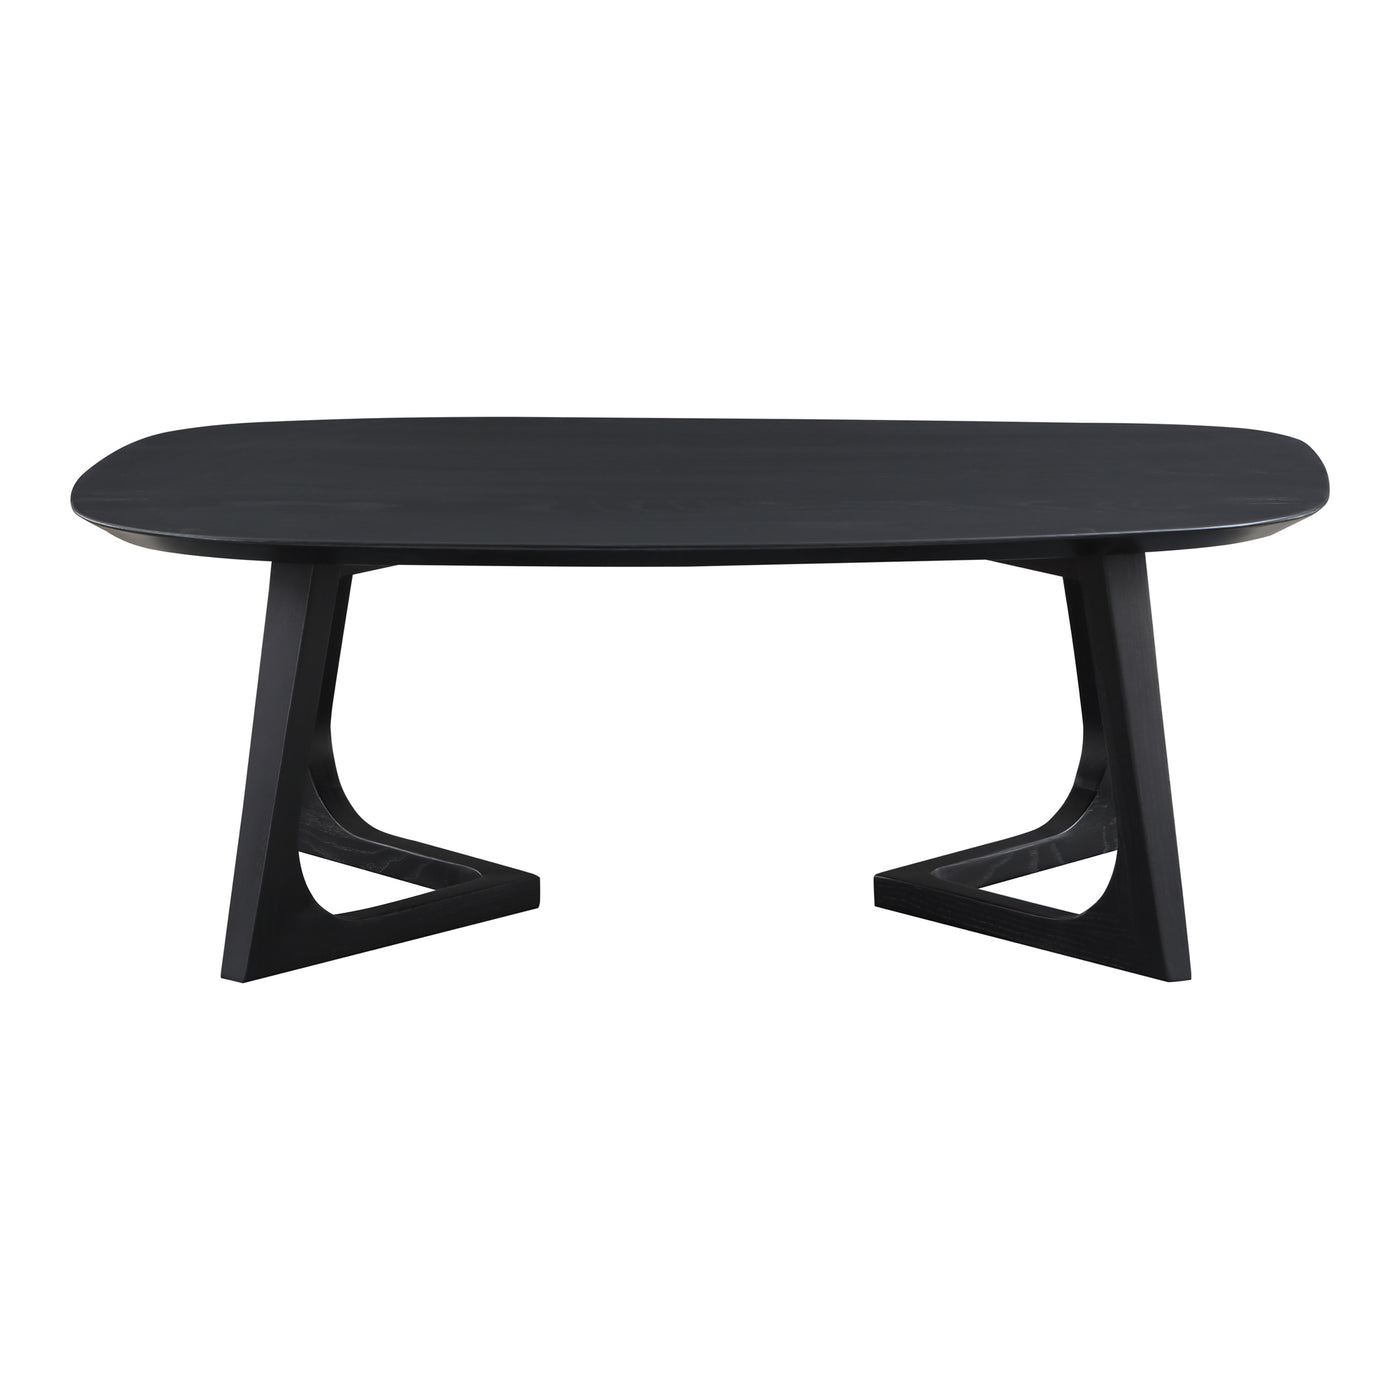 A table for every meal and occasion, big or small. With a sleek dark finish, the Godenza Coffee Table is a contemporary ta...